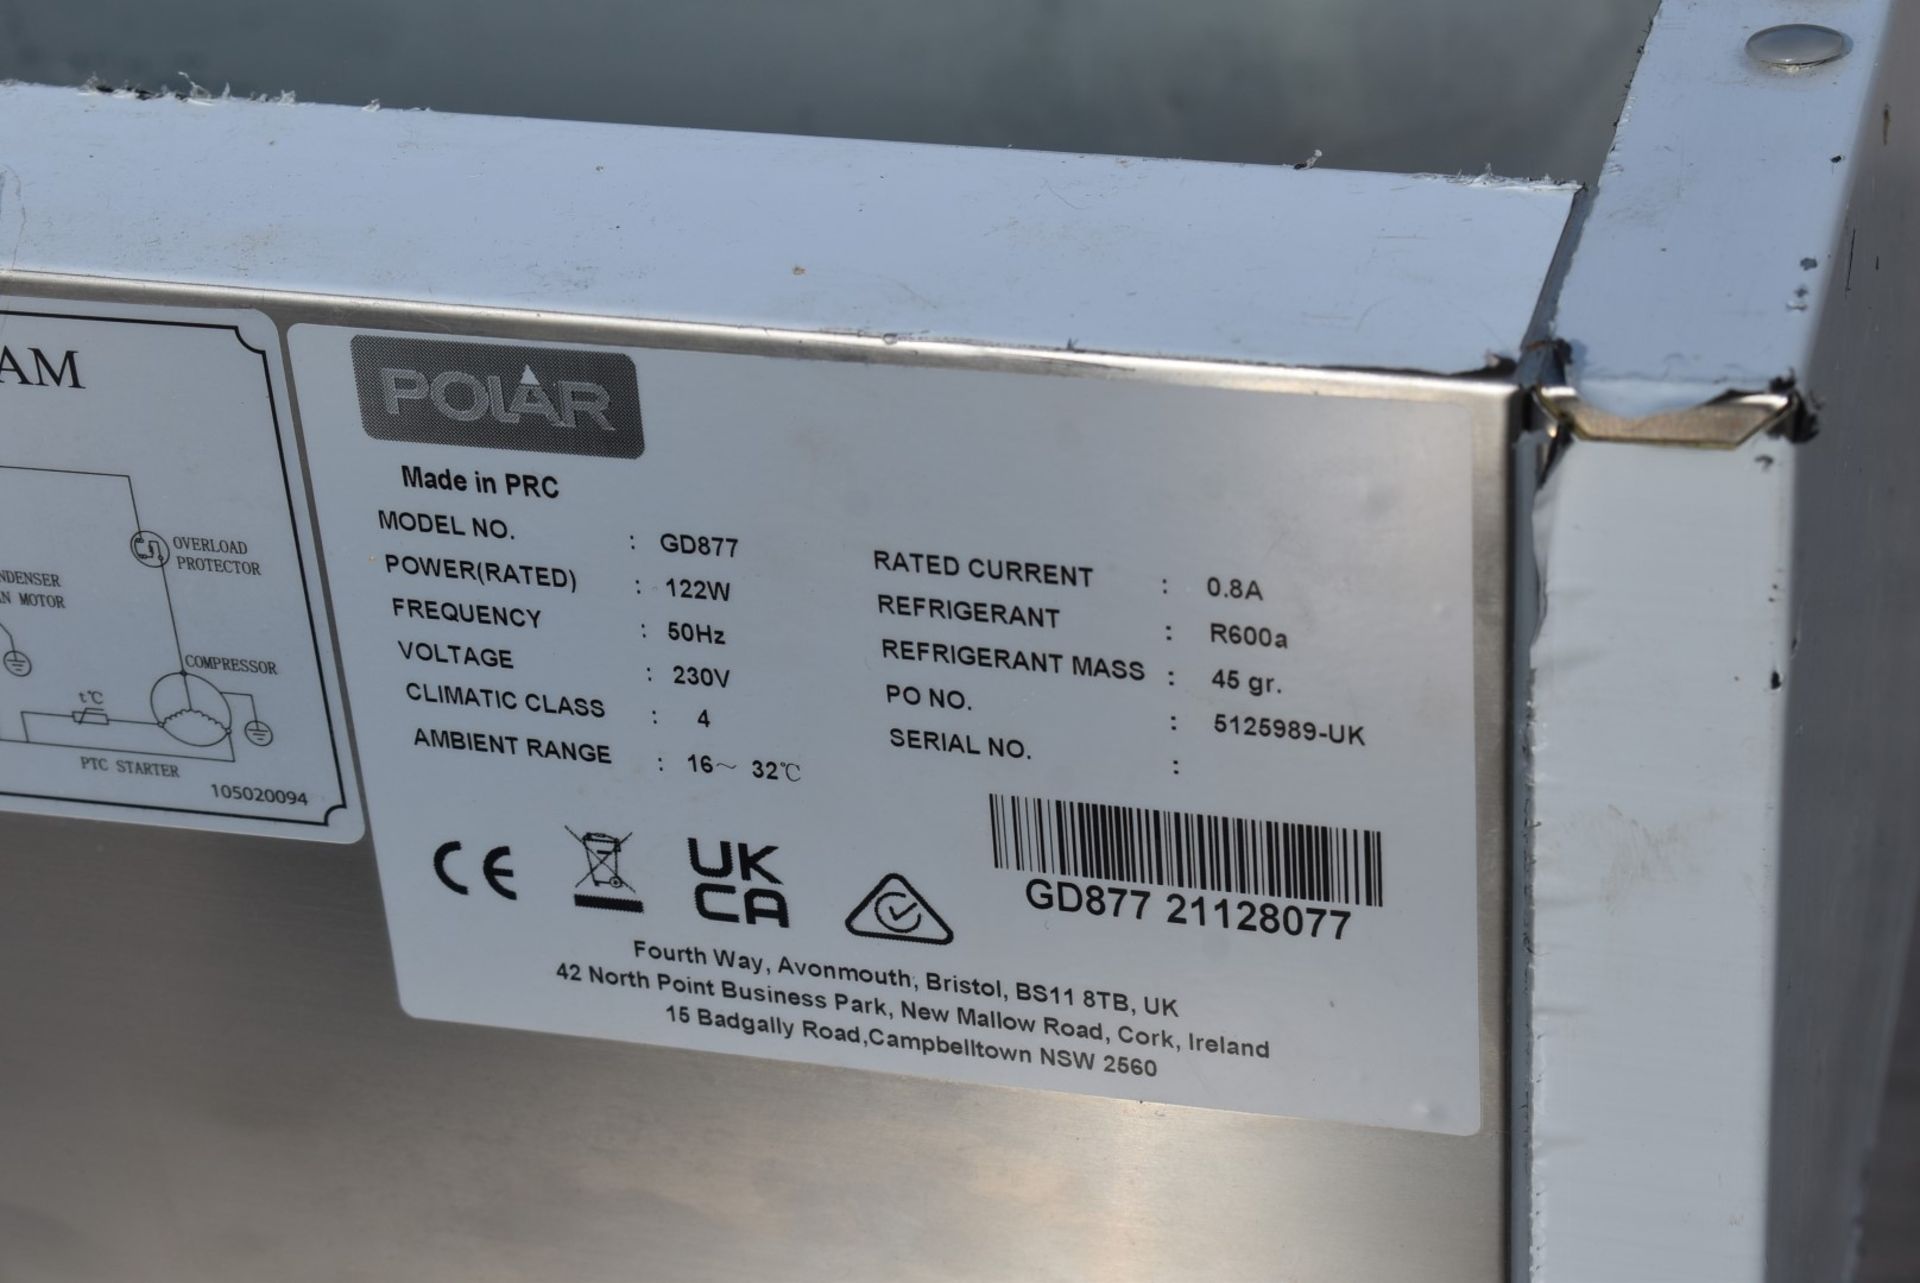 1 x Polar G-Series 200cm Countertop Salad Pizza Topper Fridge - Lid / Cover Not Included - RRP £630 - Image 4 of 10